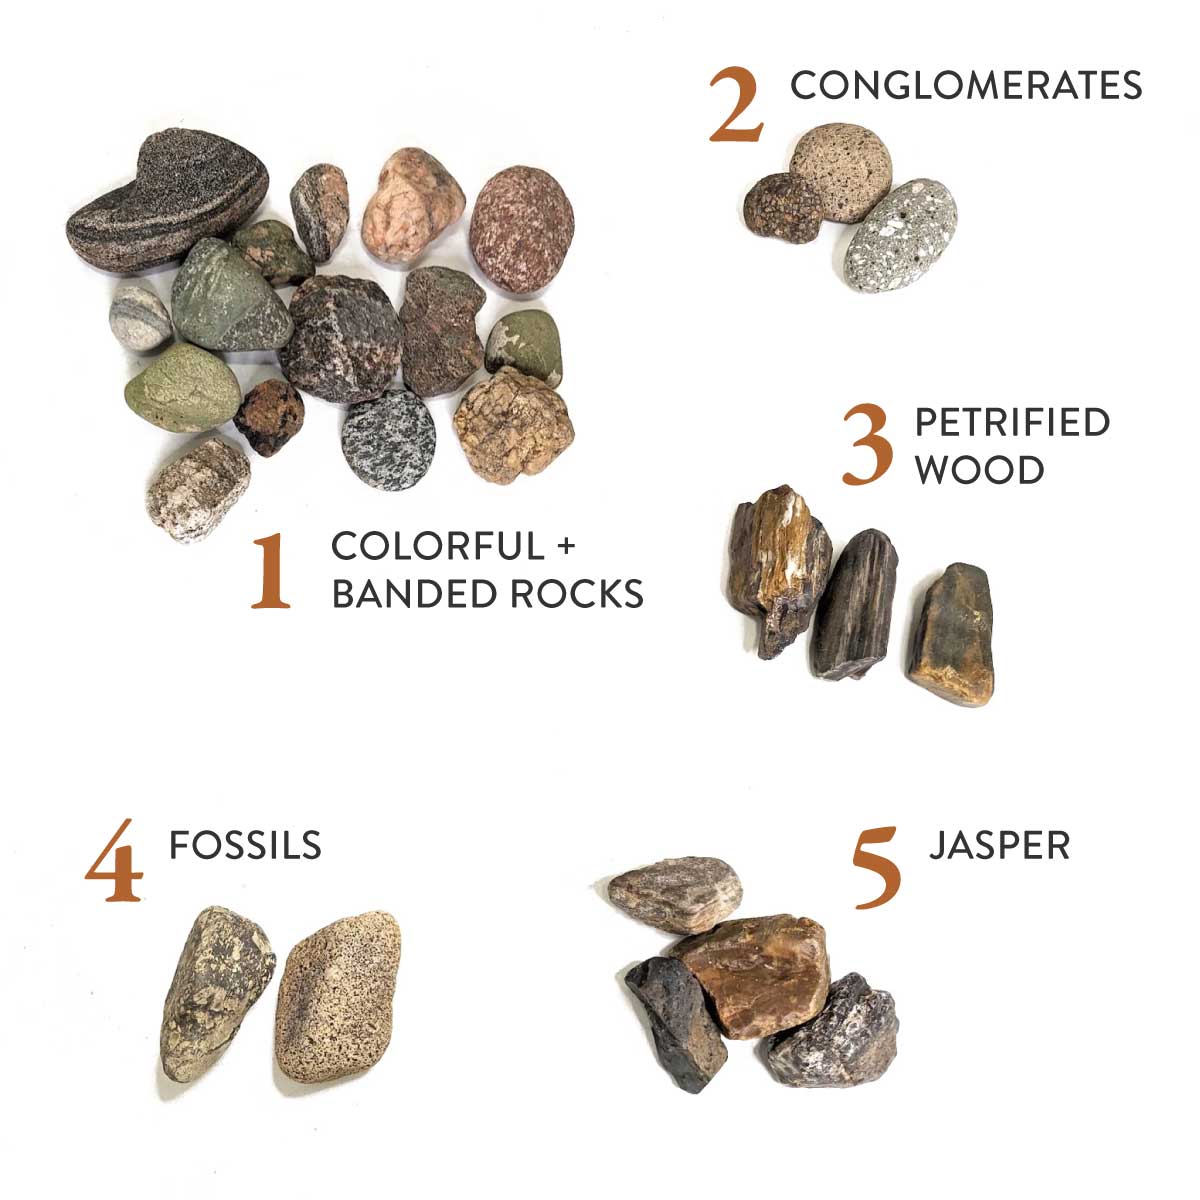 Graphic showing 5 types of landscape gravel you can turn into jewelry. Includes colorful and banded stones, conglomerates, petrified wood, fossils, and jasper.